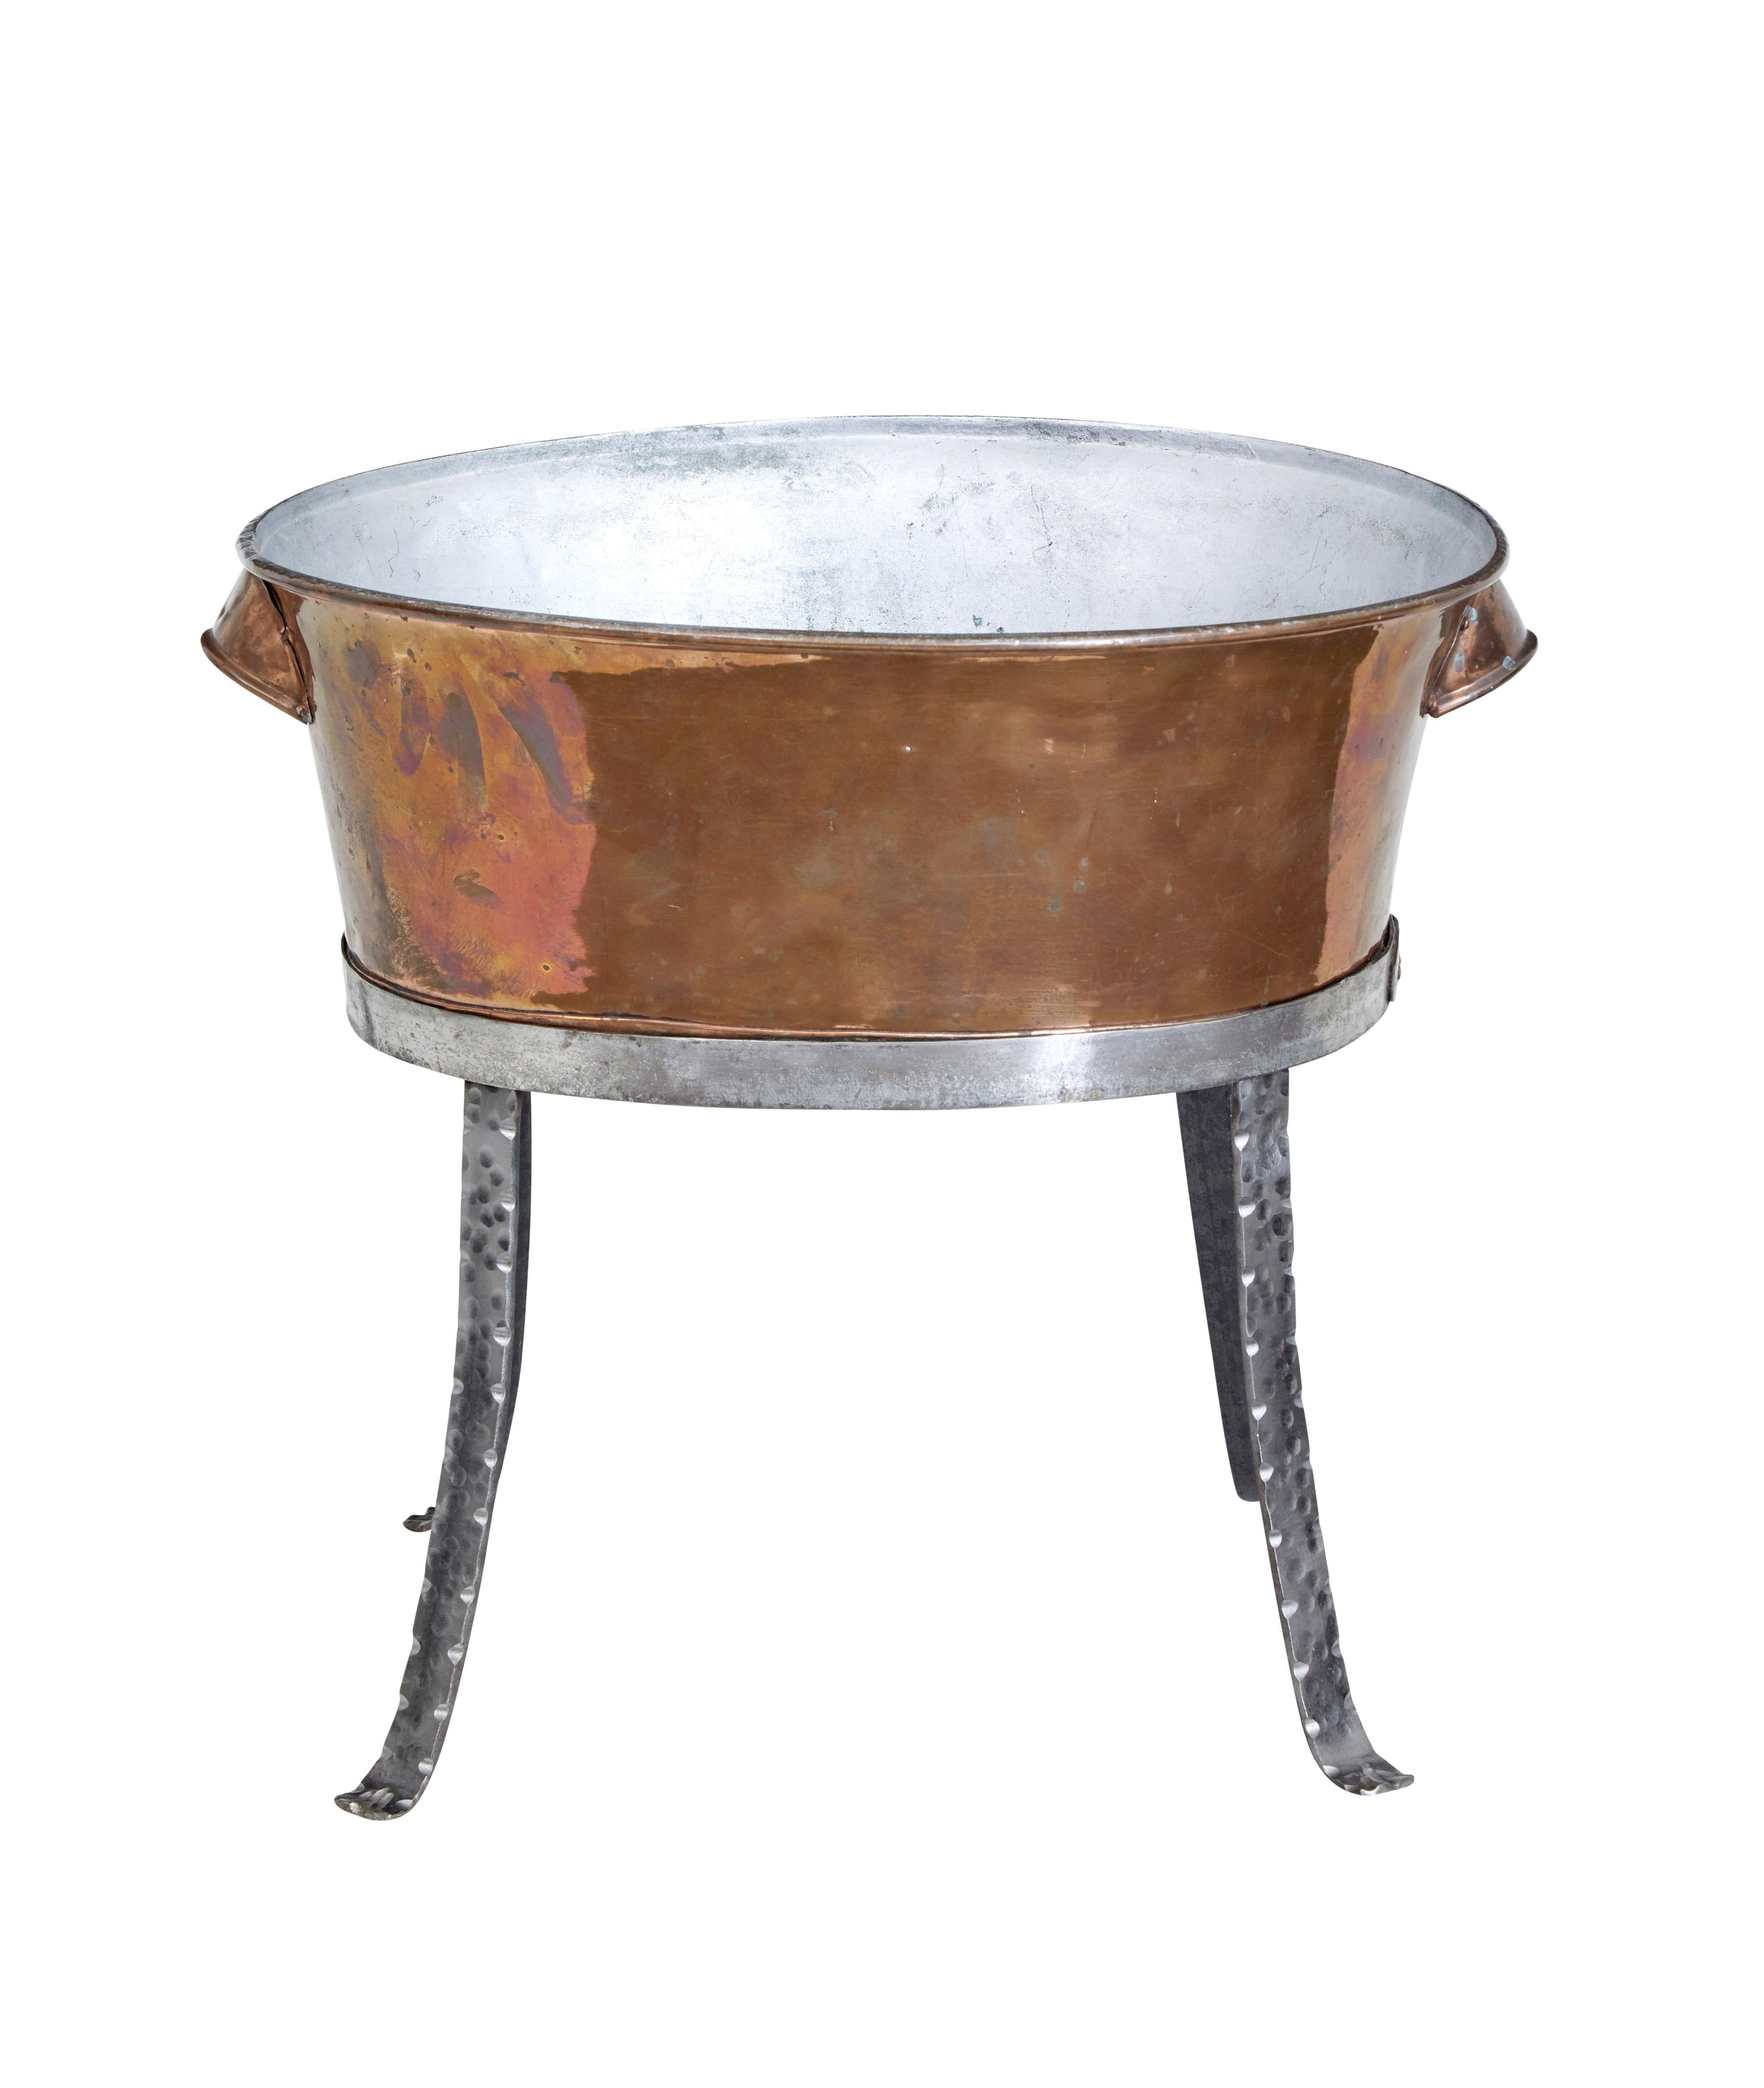 19th century arts and crafts copper bowl on stand circa 1890.

Copper pail on later hand made steel stand.  Ideal for use as a fireside kindling or log bin.

Minor expected surface marks from use, good colour and patina.